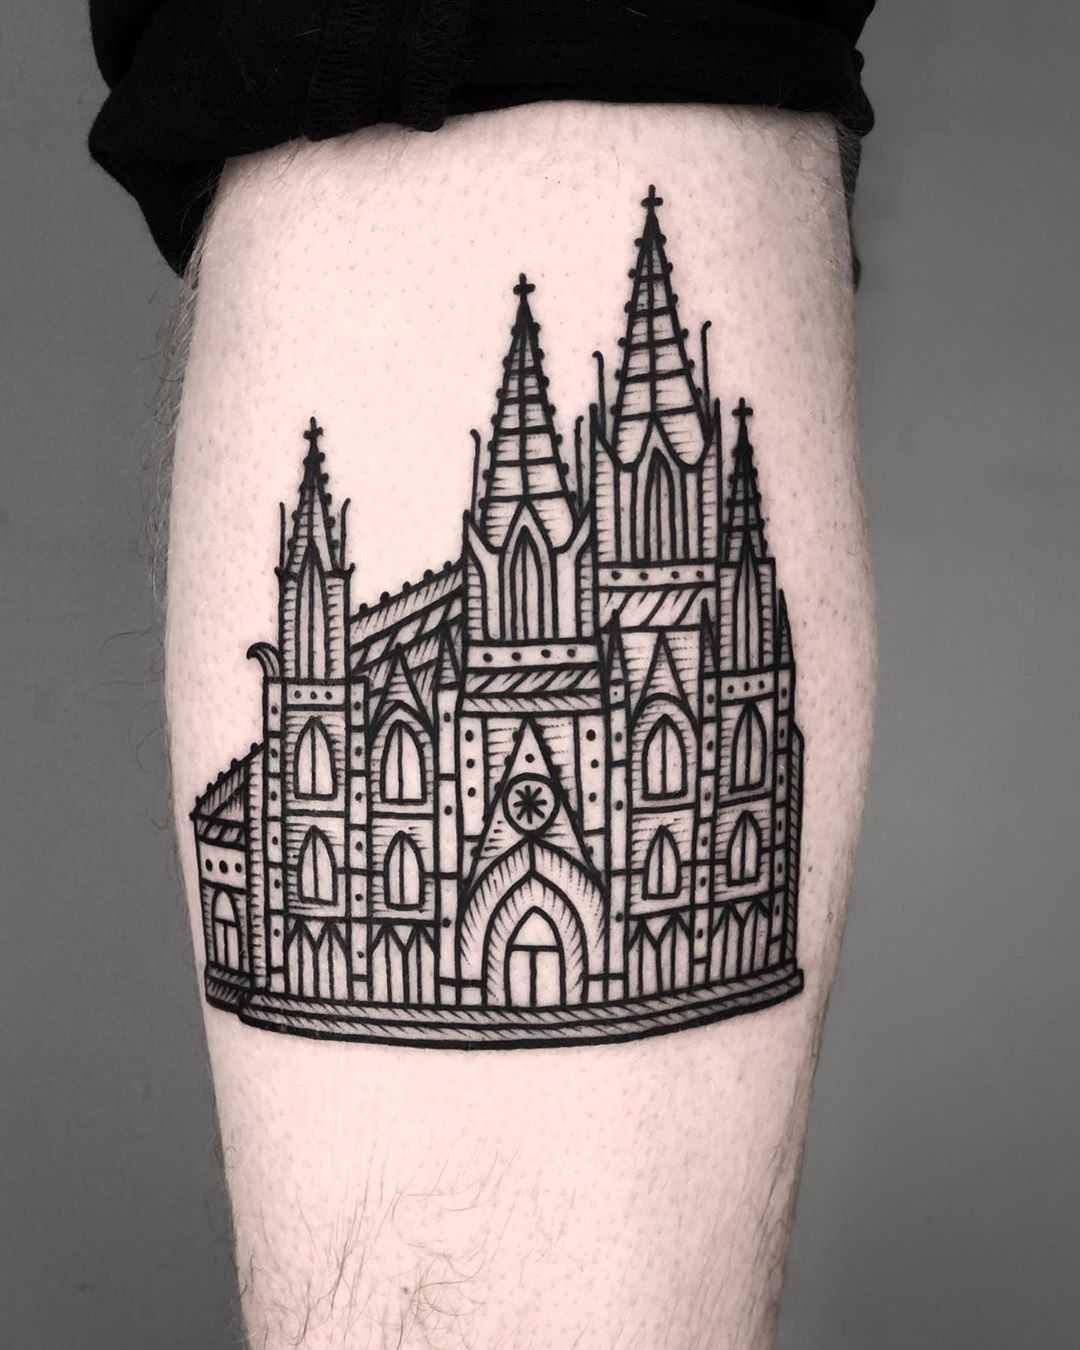 5 Unique Tattoo Ideas For Design And Architecture Lovers #architecture  #detailedtattoos #tattooinsp… | Geometric tattoo design, Geometric tattoo,  Tattoos for lovers